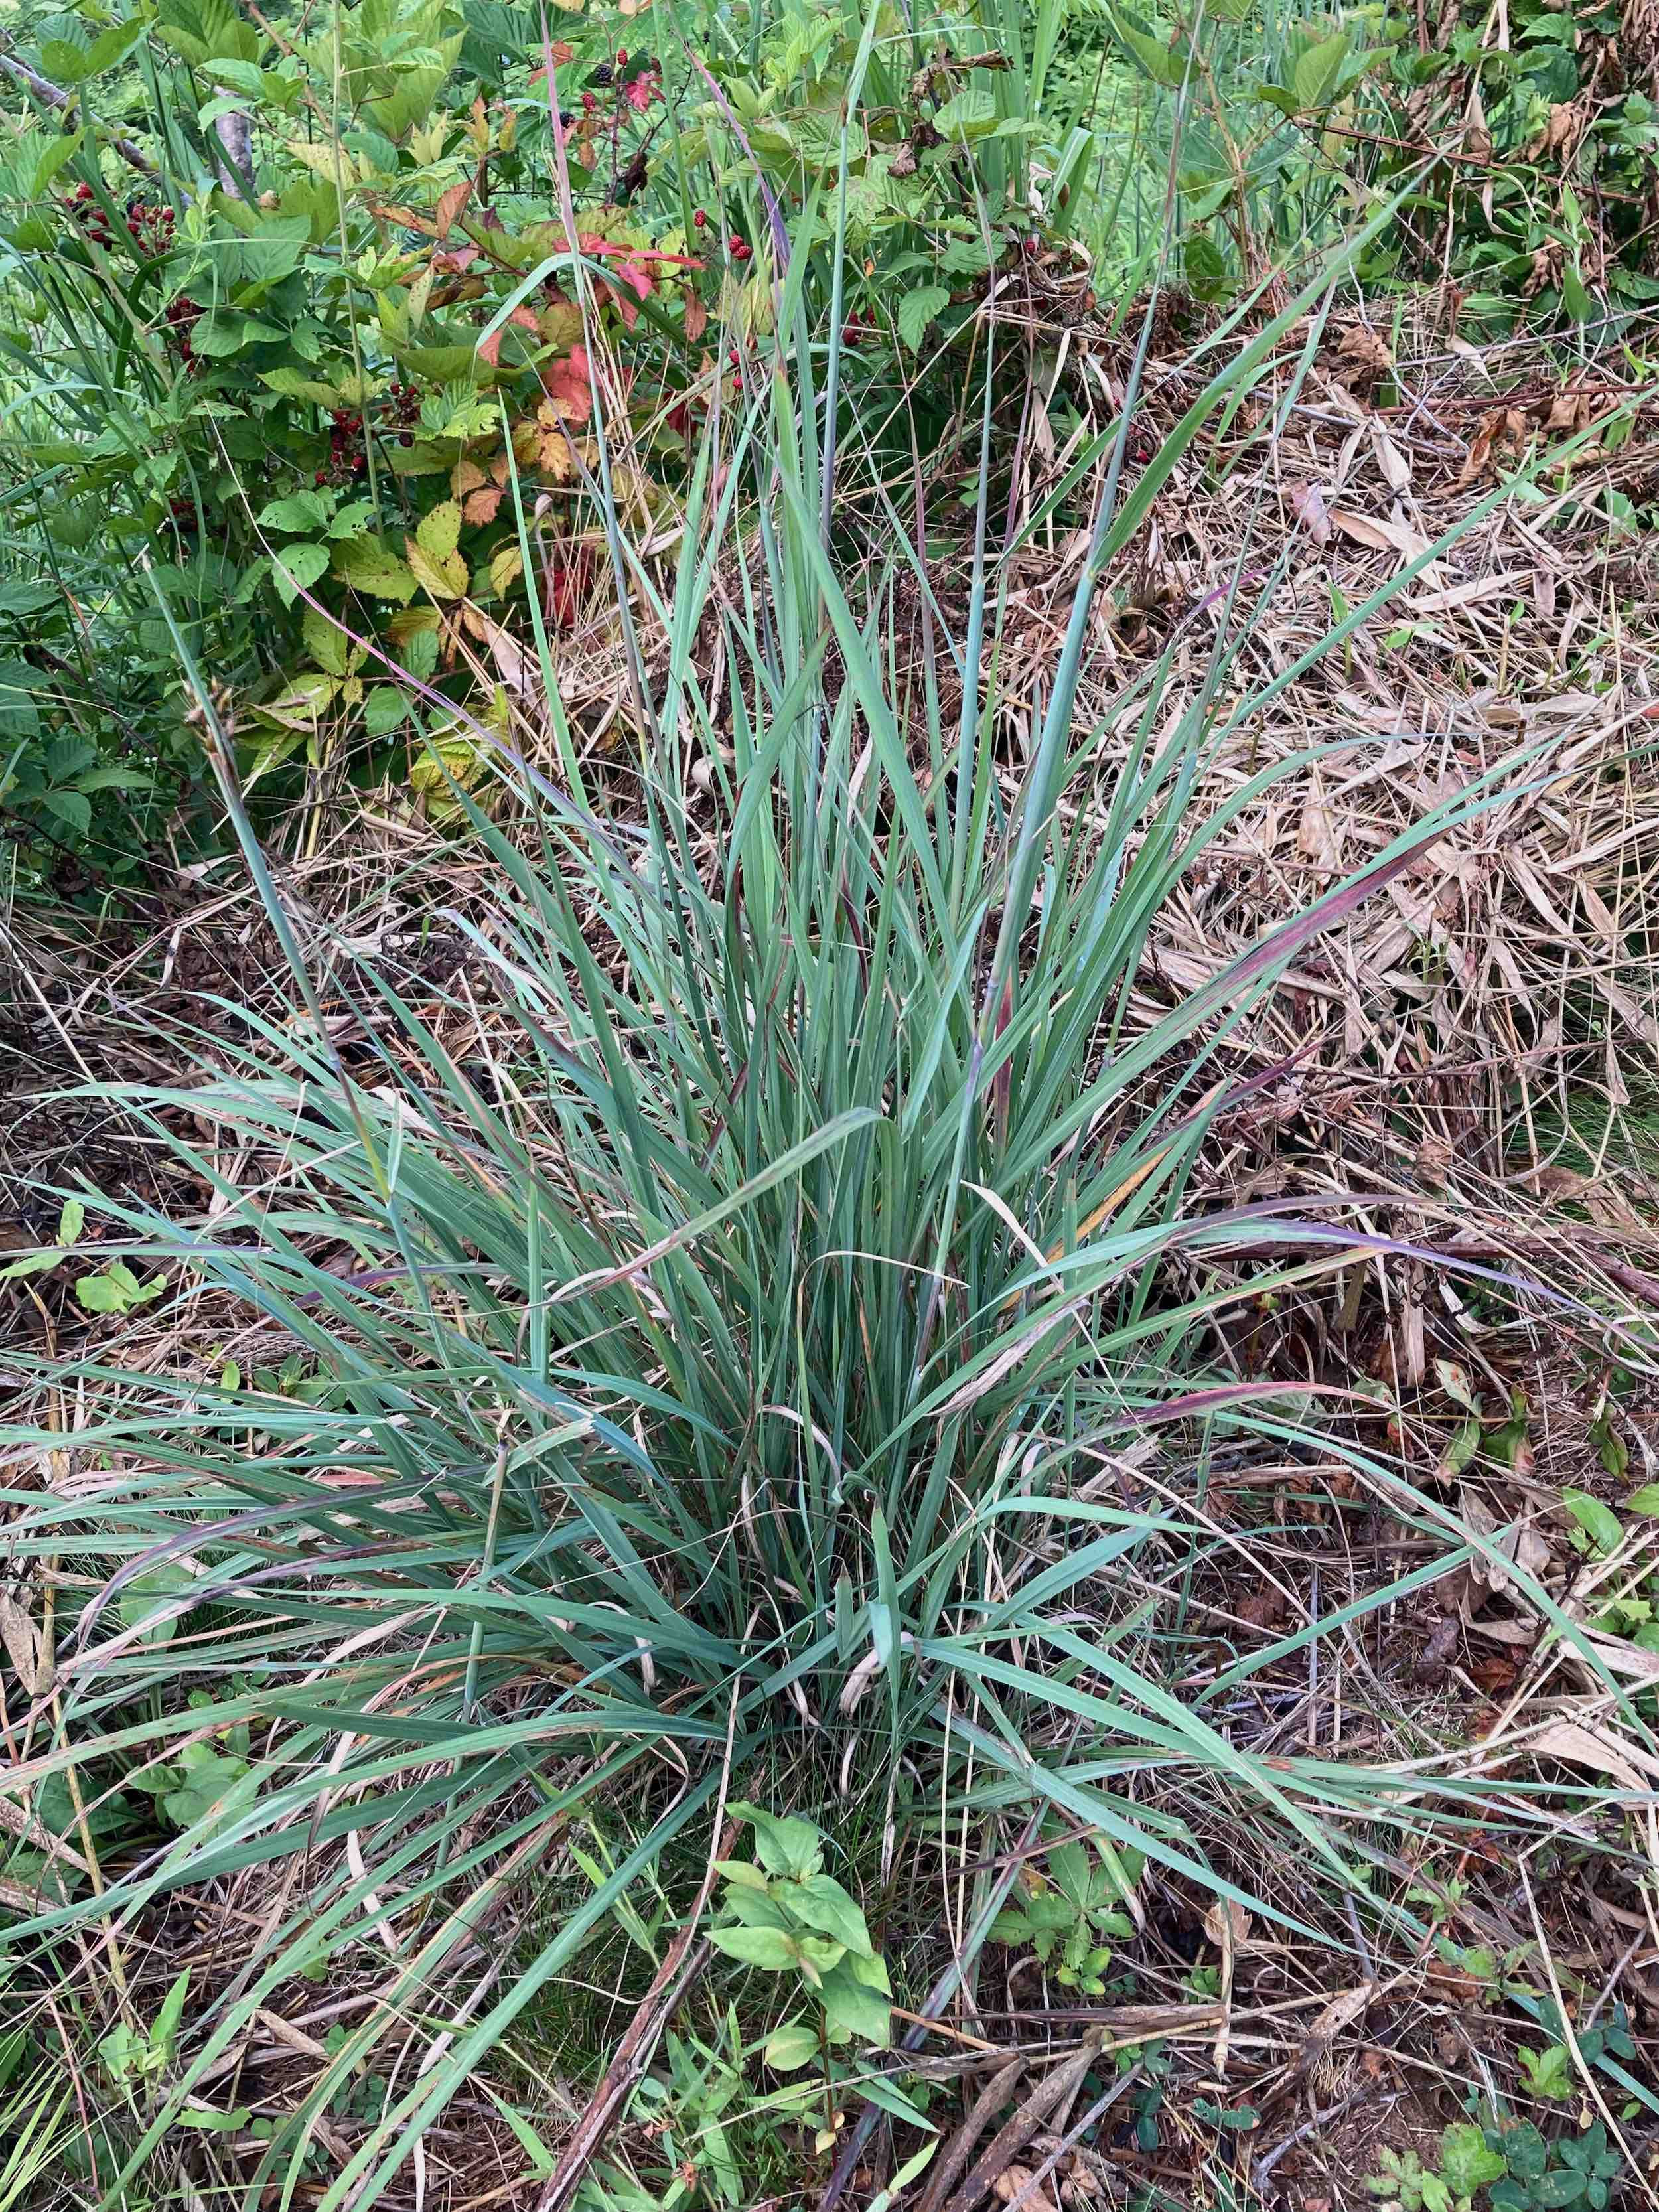 The Scientific Name is Sorghastrum nutans. You will likely hear them called Yellow Indiangrass, Prairie Indiangrass. This picture shows the The glaucous stems and leaves give the plant a bluish color. of Sorghastrum nutans